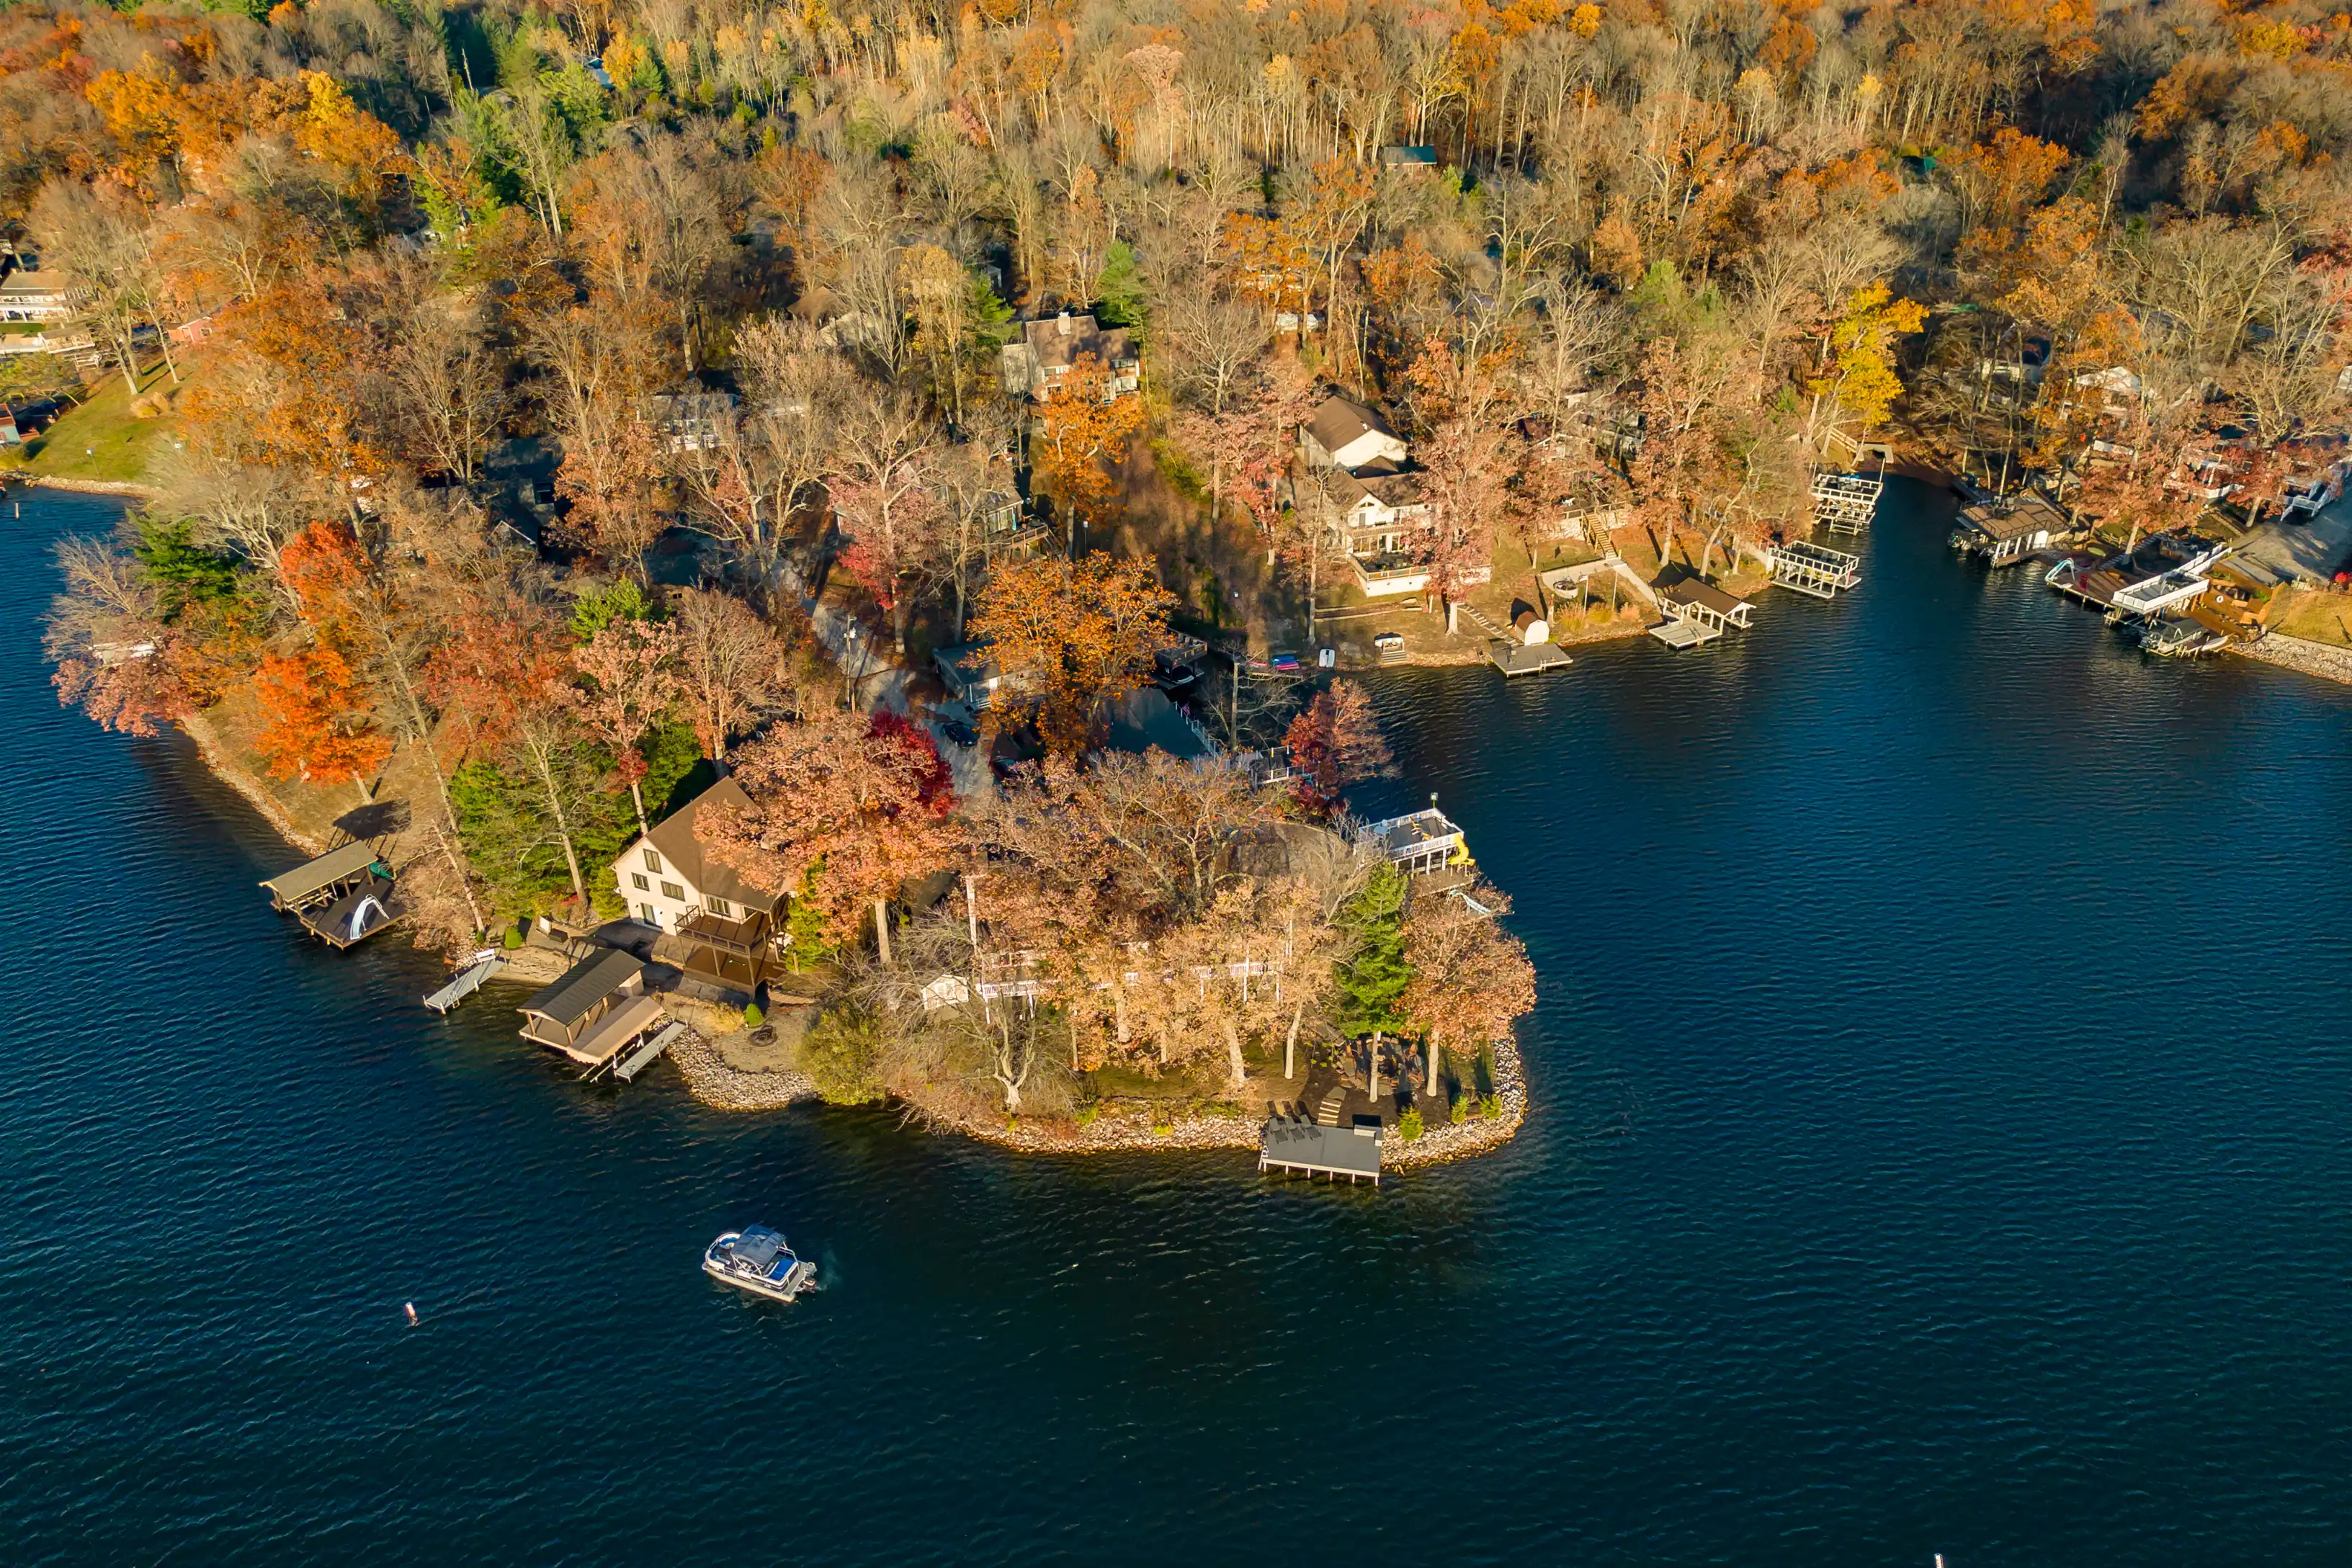 Aerial view of a peninsula with houses surrounded by a lake with docks and boats during autumn.